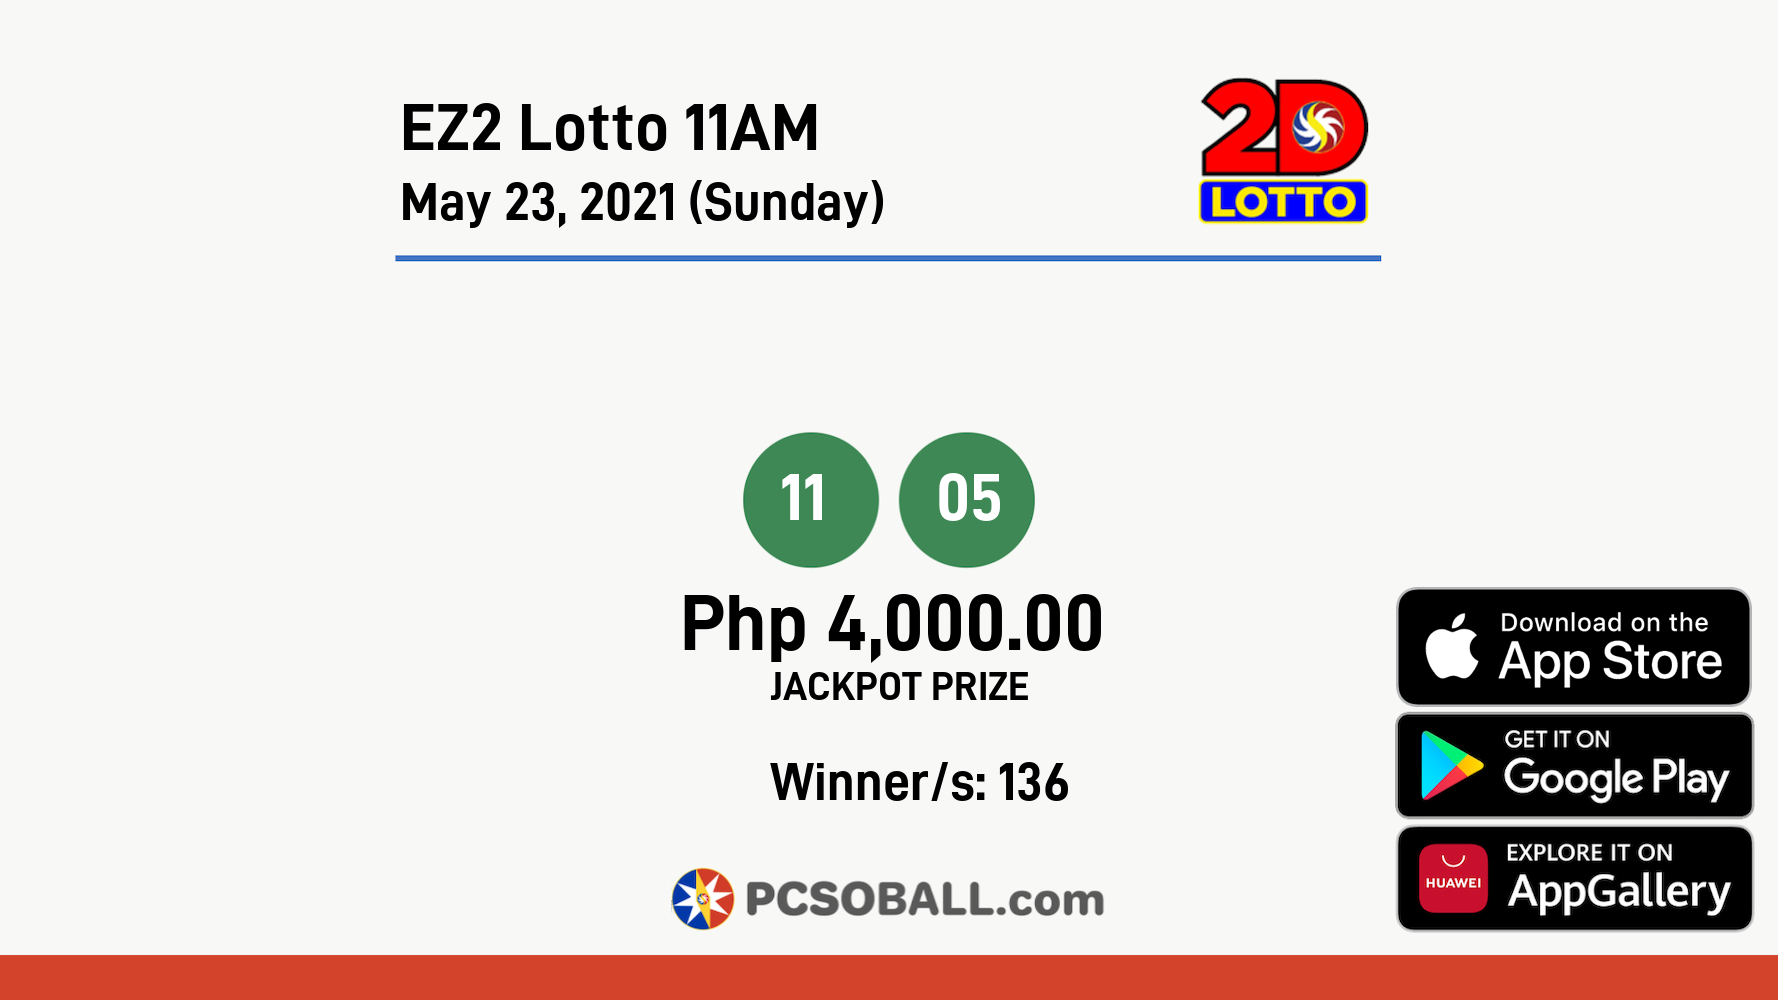 EZ2 Lotto 11AM May 23, 2021 (Sunday) Result